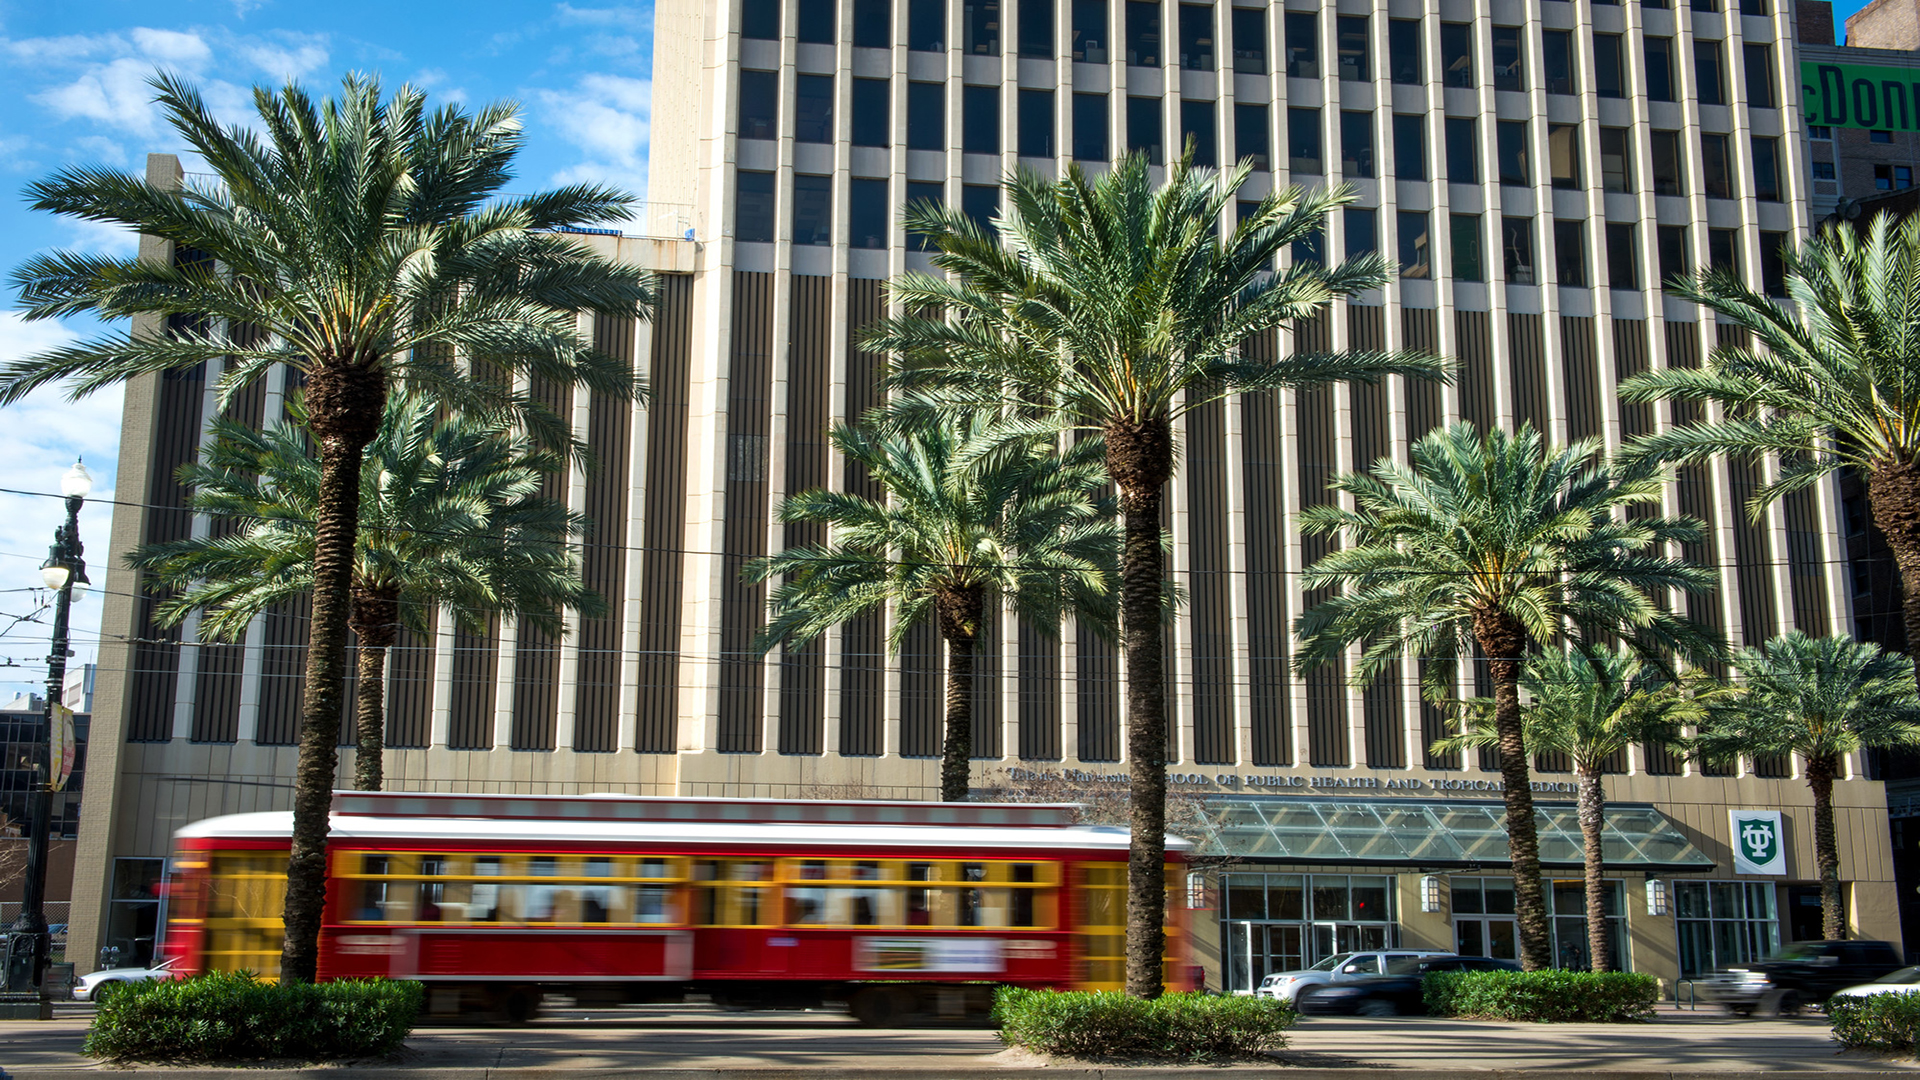 Streetcar passing the Tidewater Building.